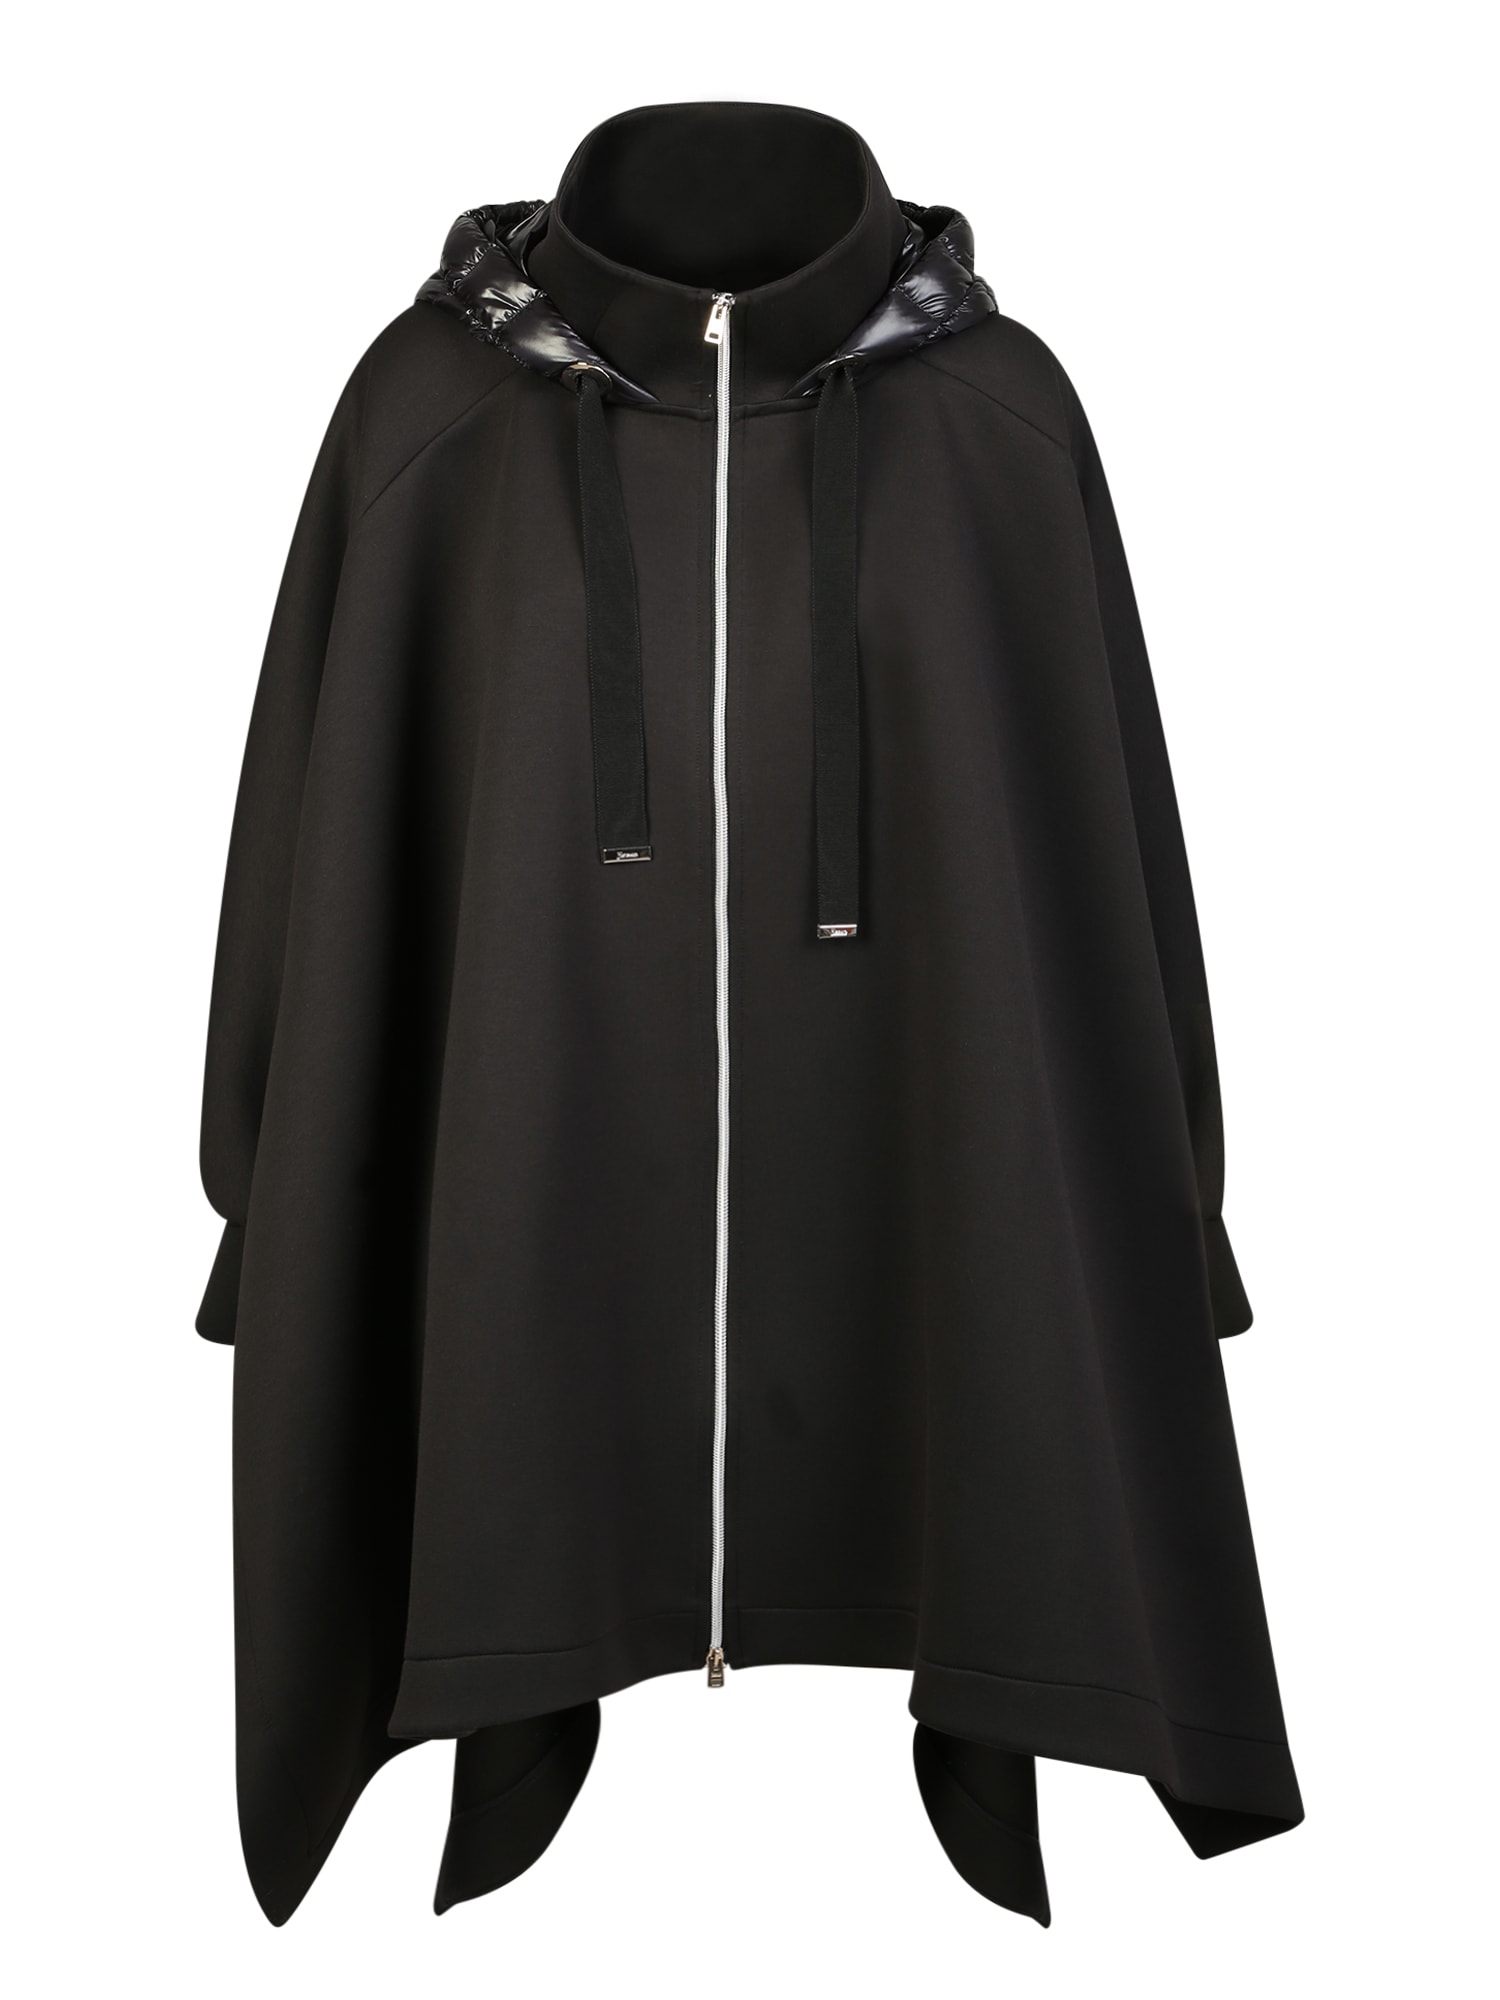 Asymmetrical Coat With Hood By Herno